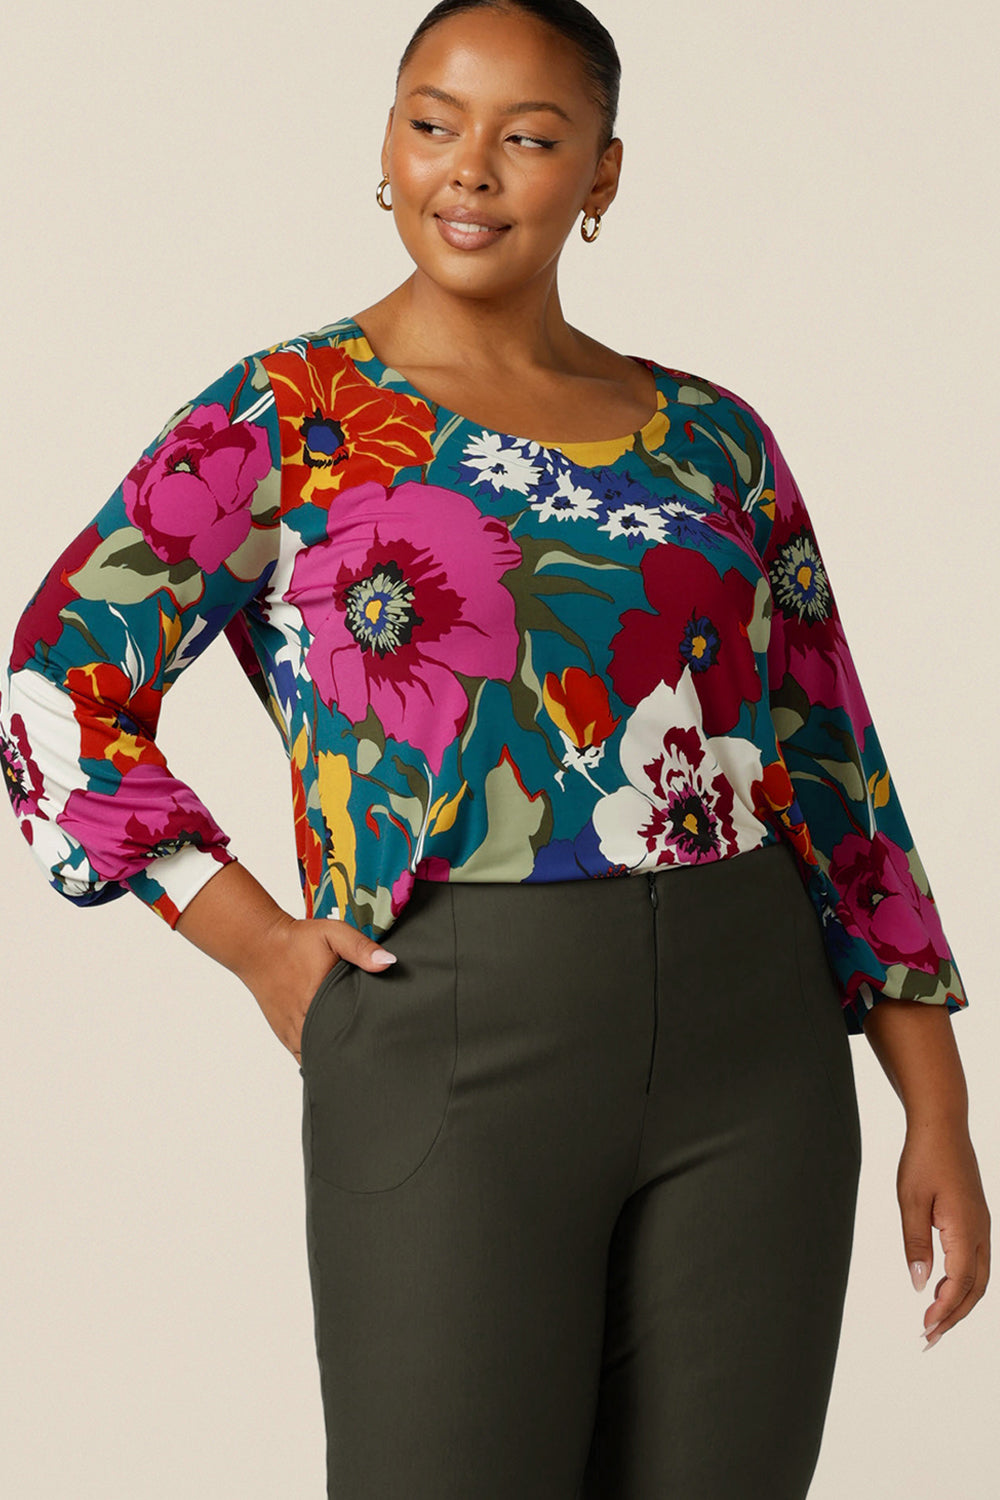 A fuller figure woman wears a tailored jersey top with long bishop sleeves, scoop neckline and shirttail hemline. Australian made, this work wear top for petite to plus size women is available to shop online at L&F Australia.